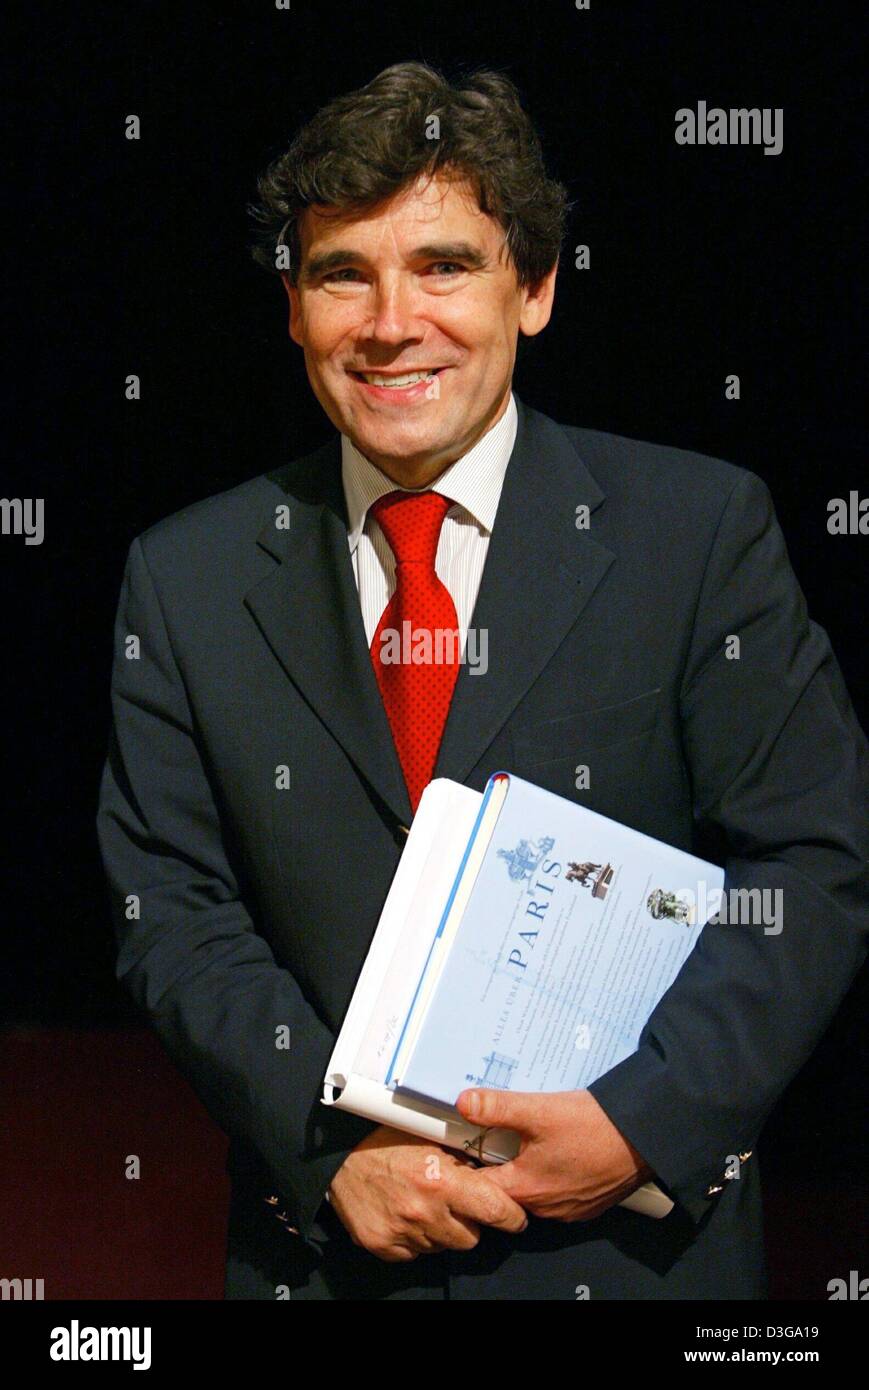 (dpa) - The French ambassador to Germany, Claude Martin, in a picture taken at the French embassy in Berlin, Germany, 6 July 2004. Stock Photo